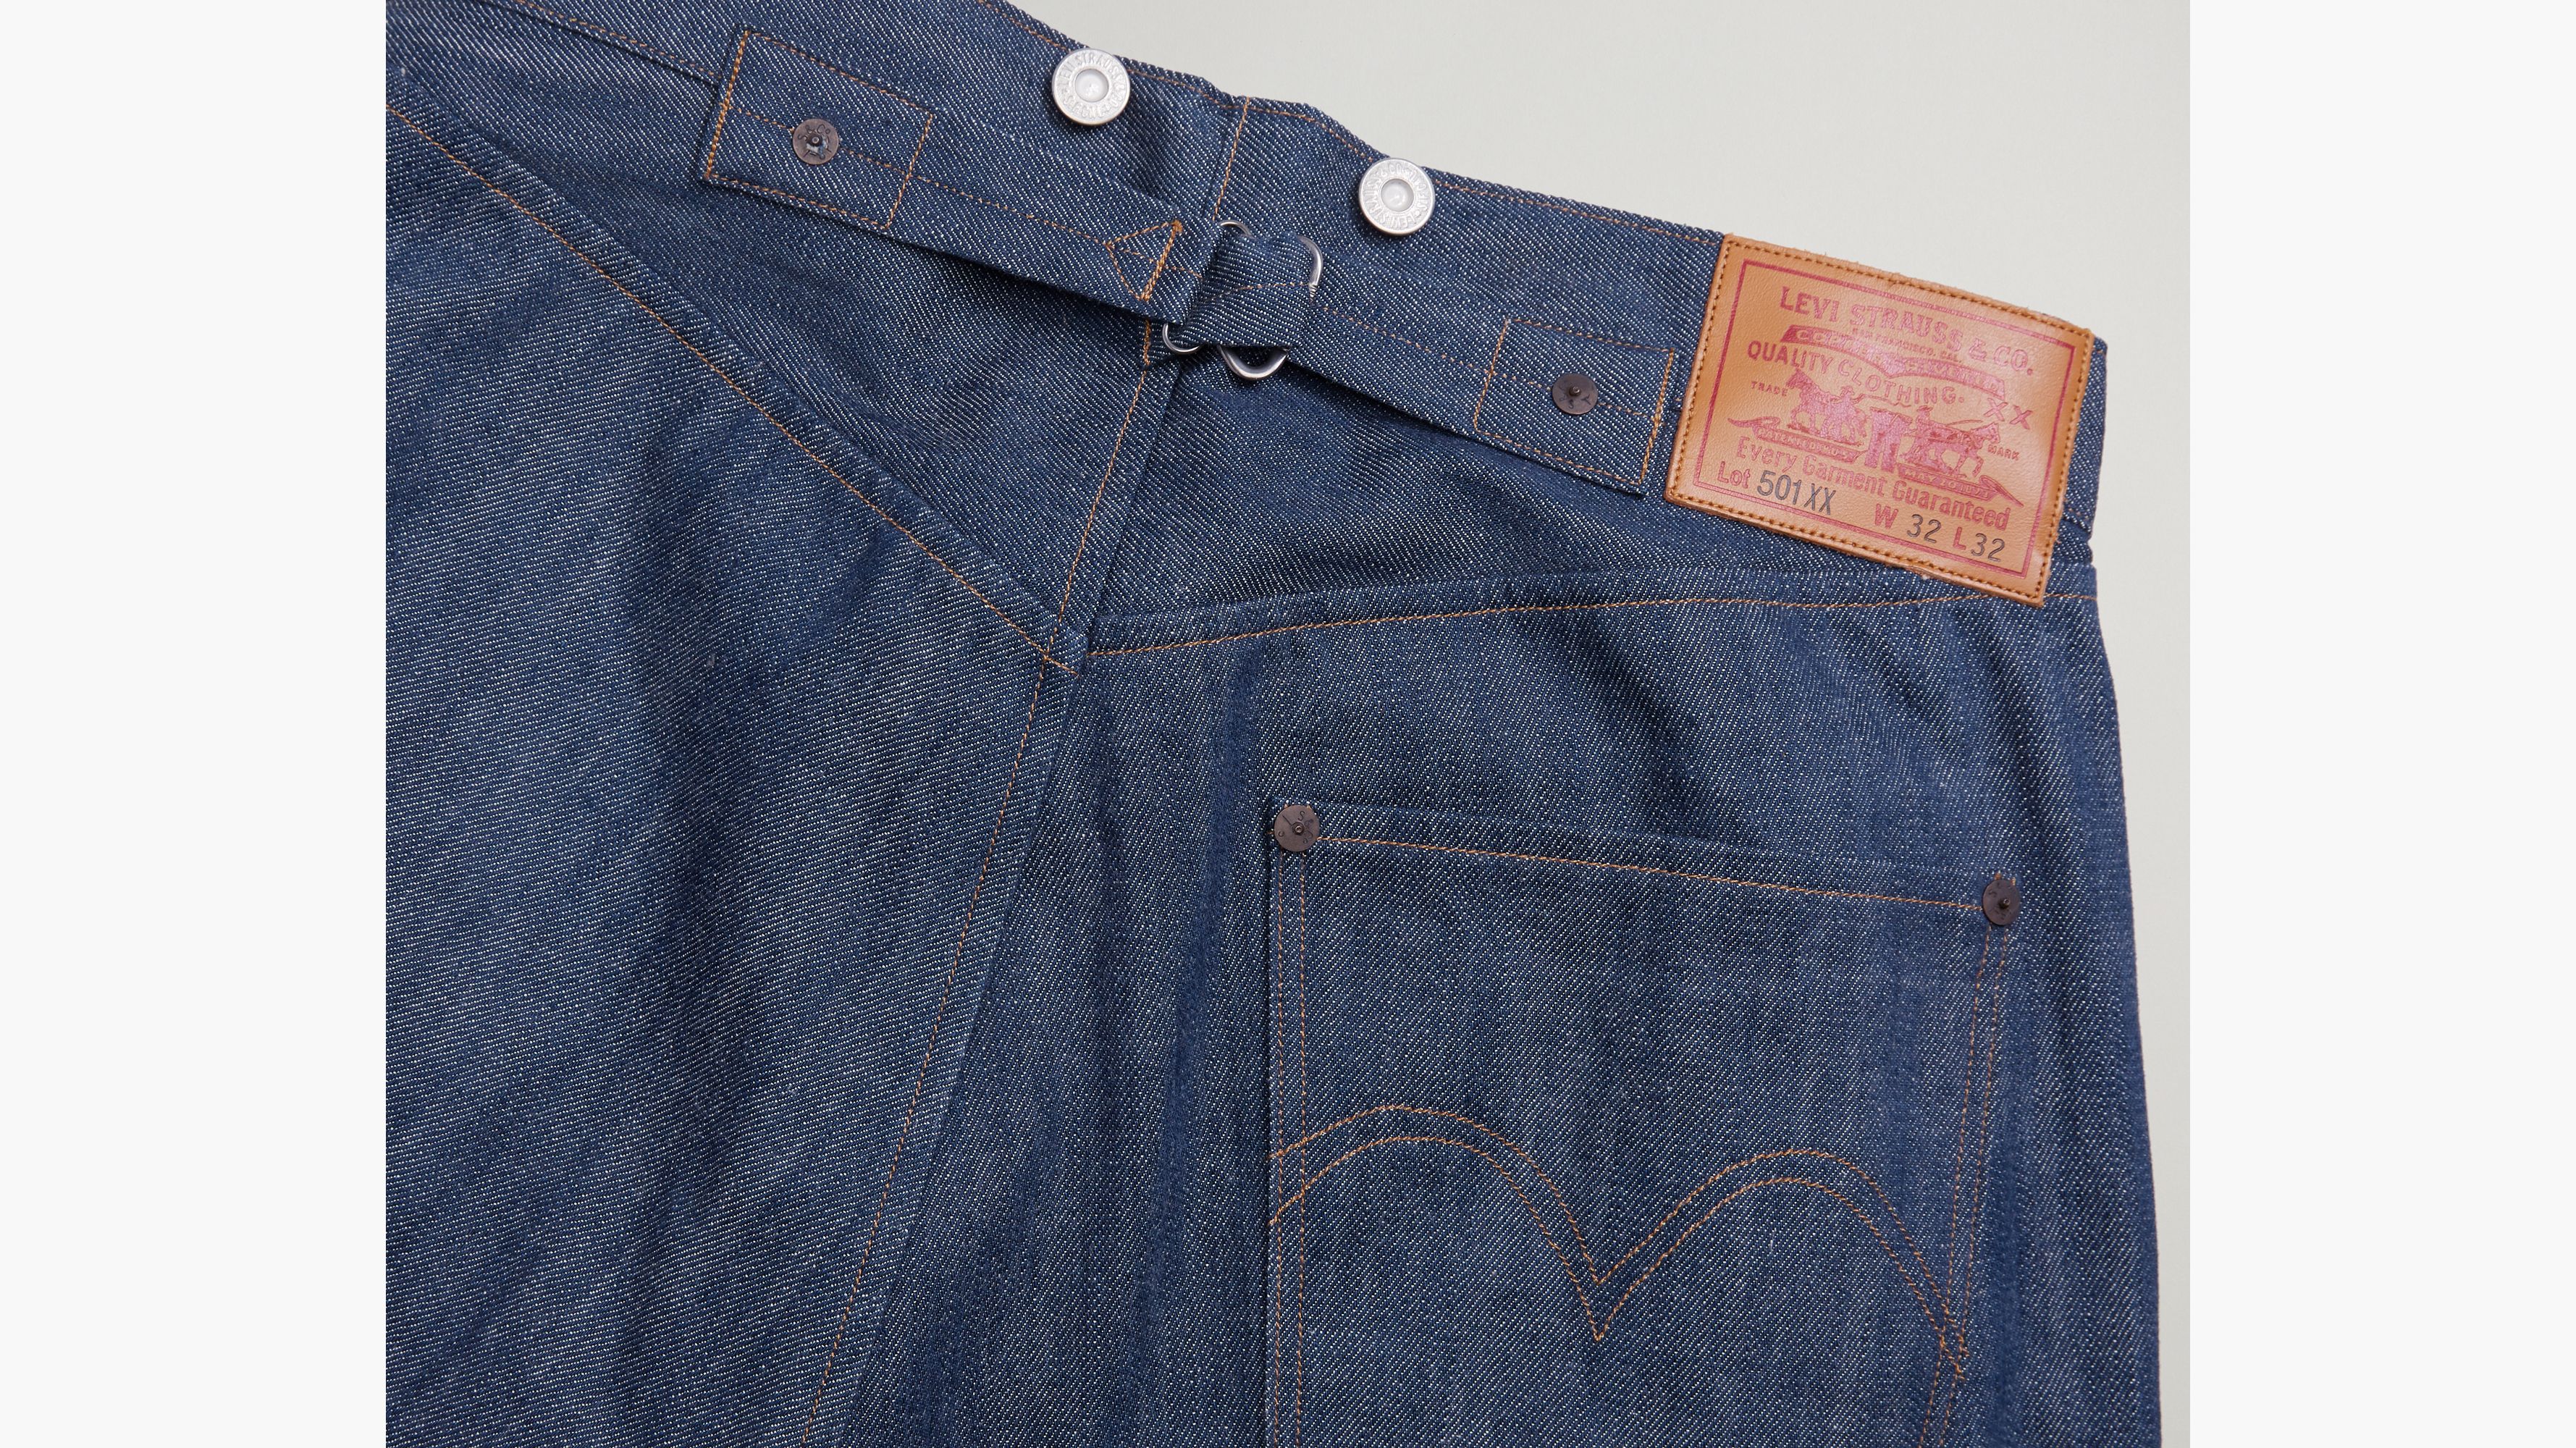 1890 levis 501 jeans Cheaper Than 